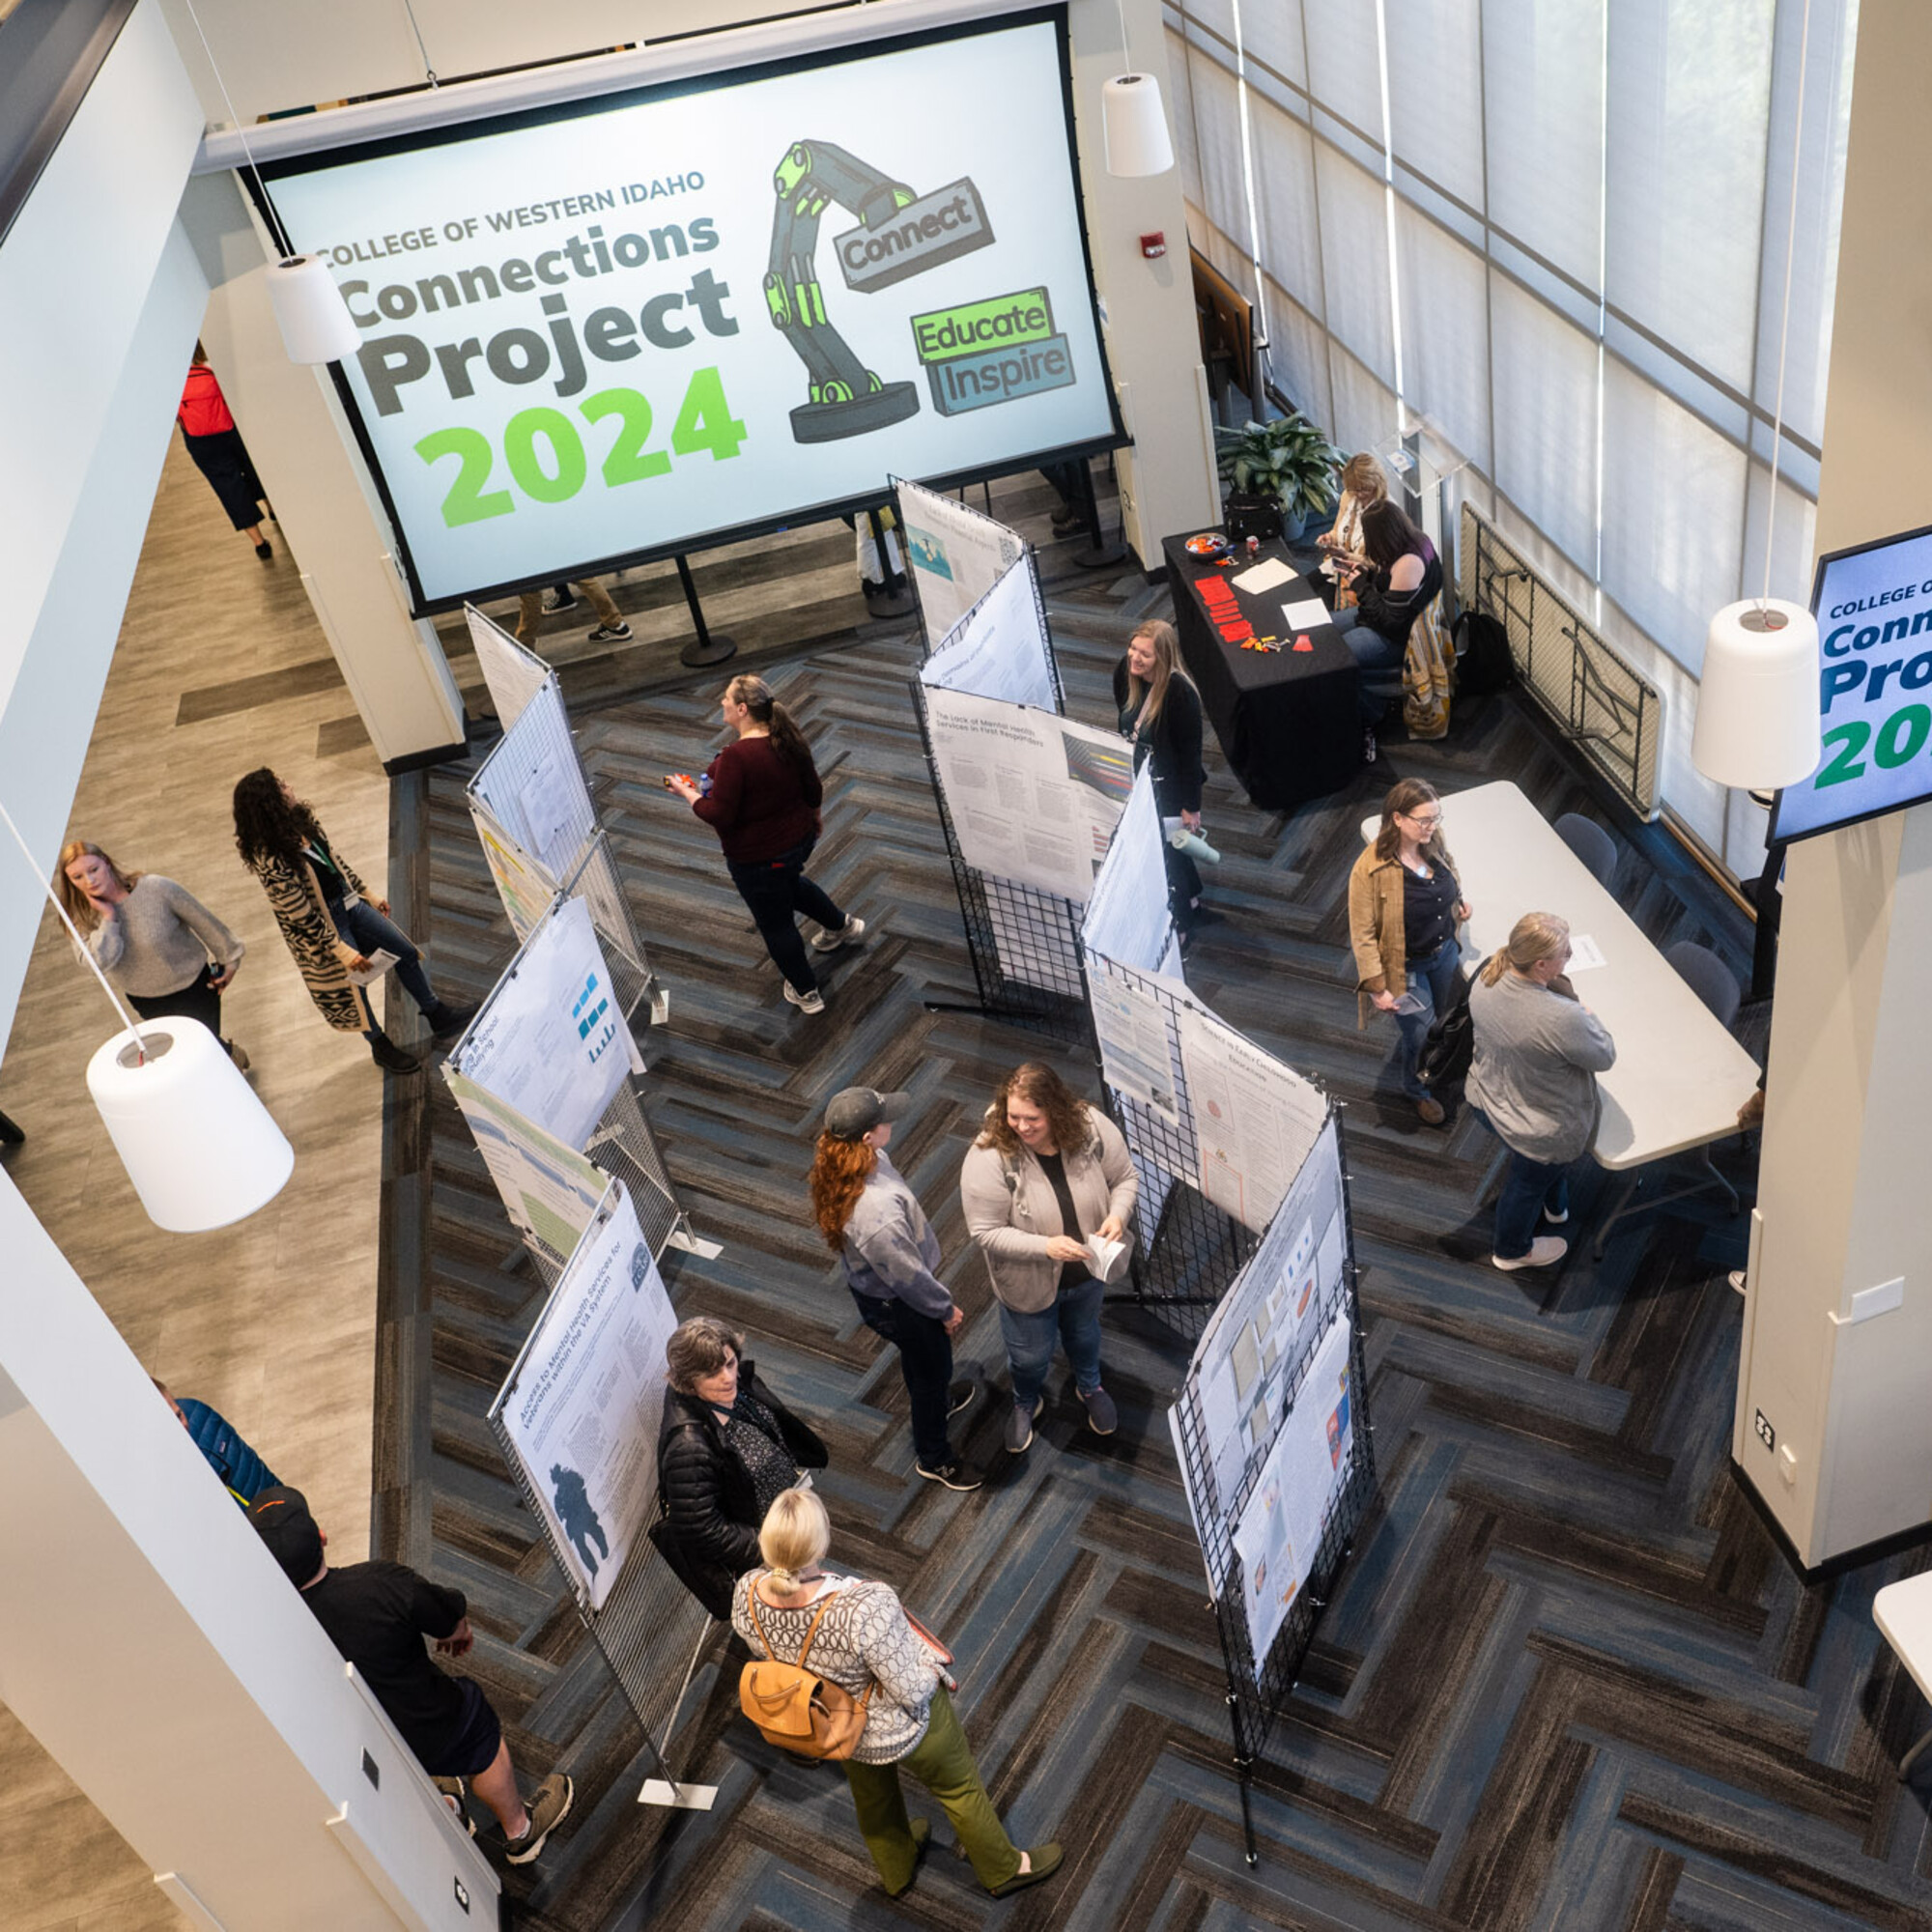 Students and members of the community browse research posters at an event. Screens display "Connections Project 2024."